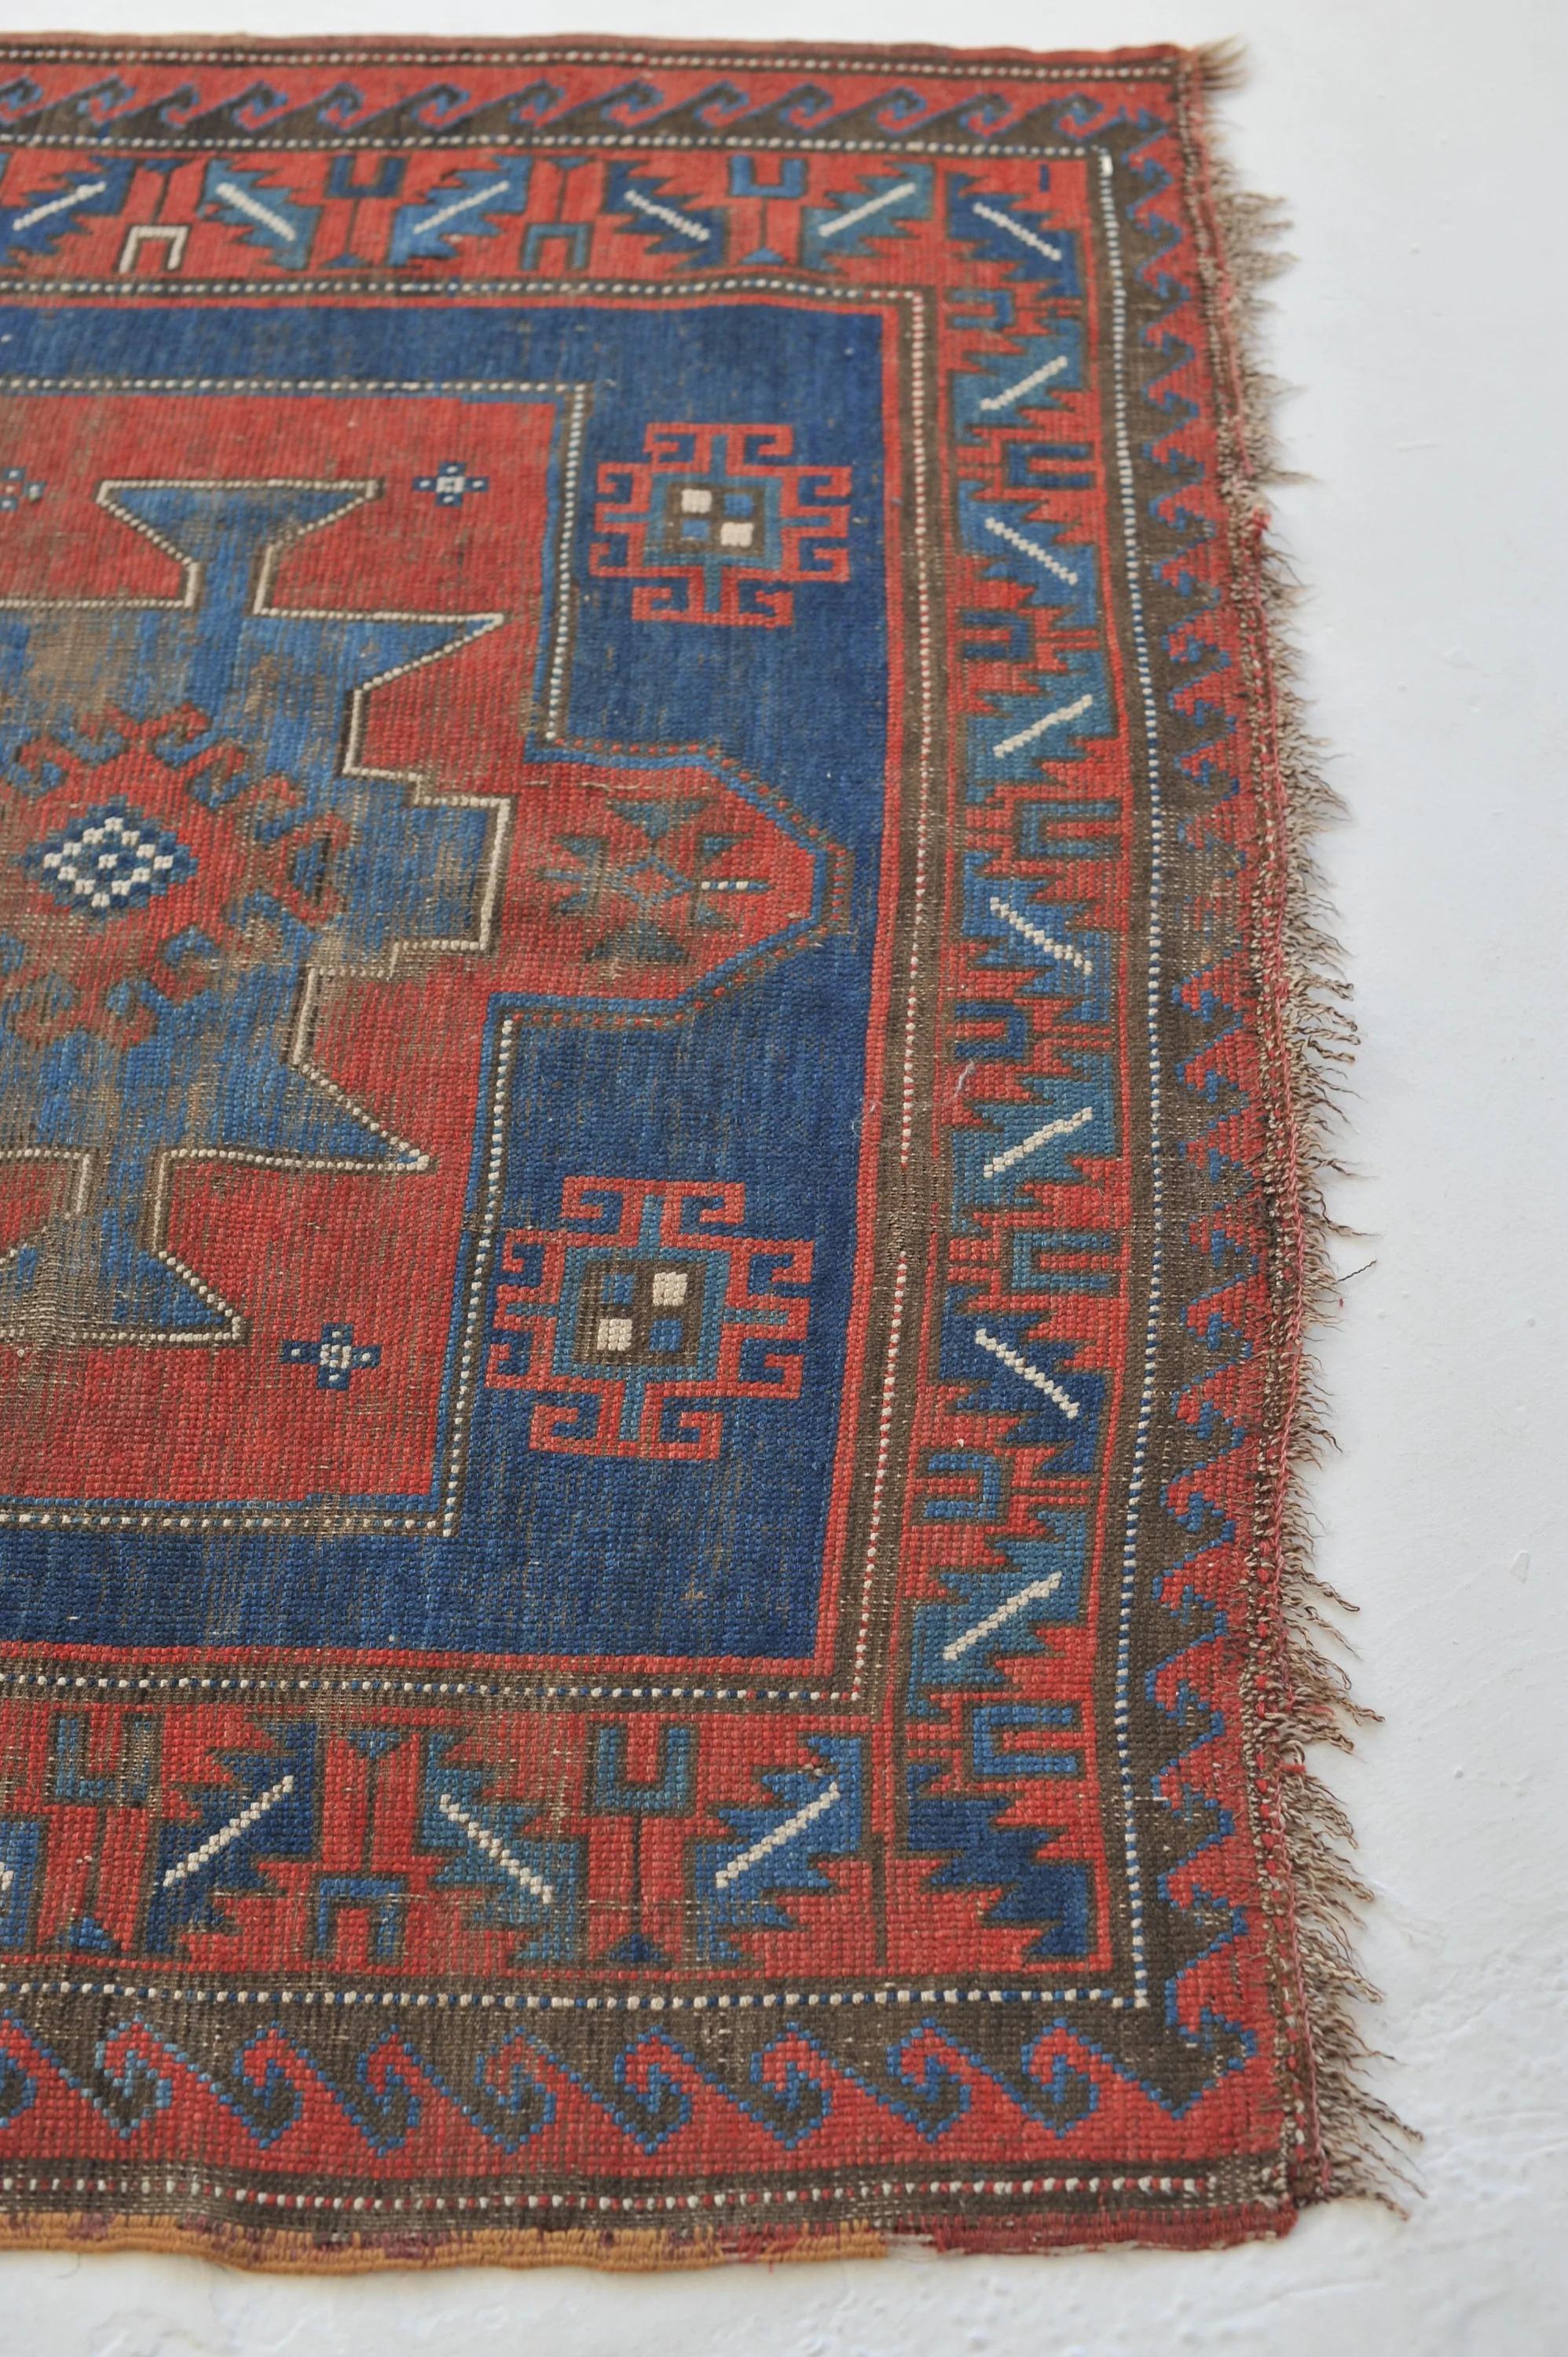 Noah Old World Sensational Antique Caucasian Geometric Antique Kazak Tribal Rug

About: A gorgeous antique kazak from a region where rug weaving has been so significant to the people, land, and culture. arguably the greatest rug weaving territory,